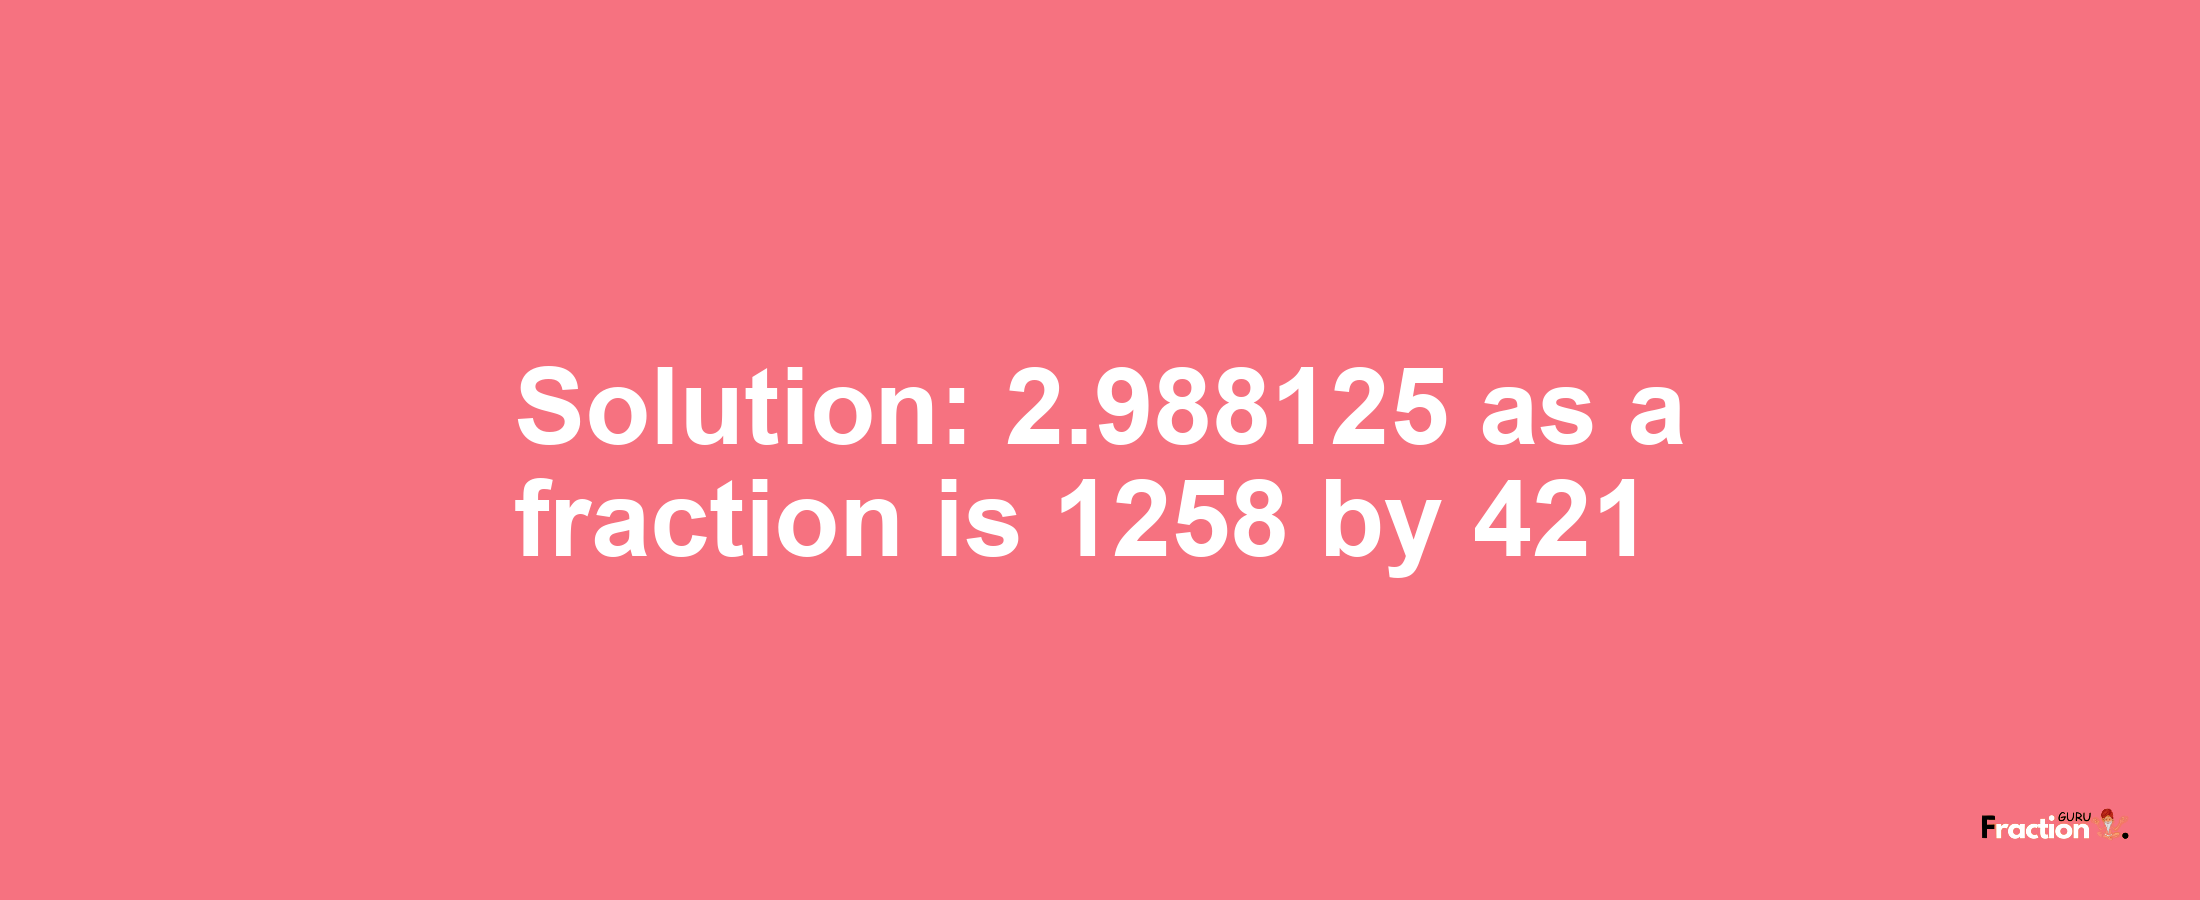 Solution:2.988125 as a fraction is 1258/421